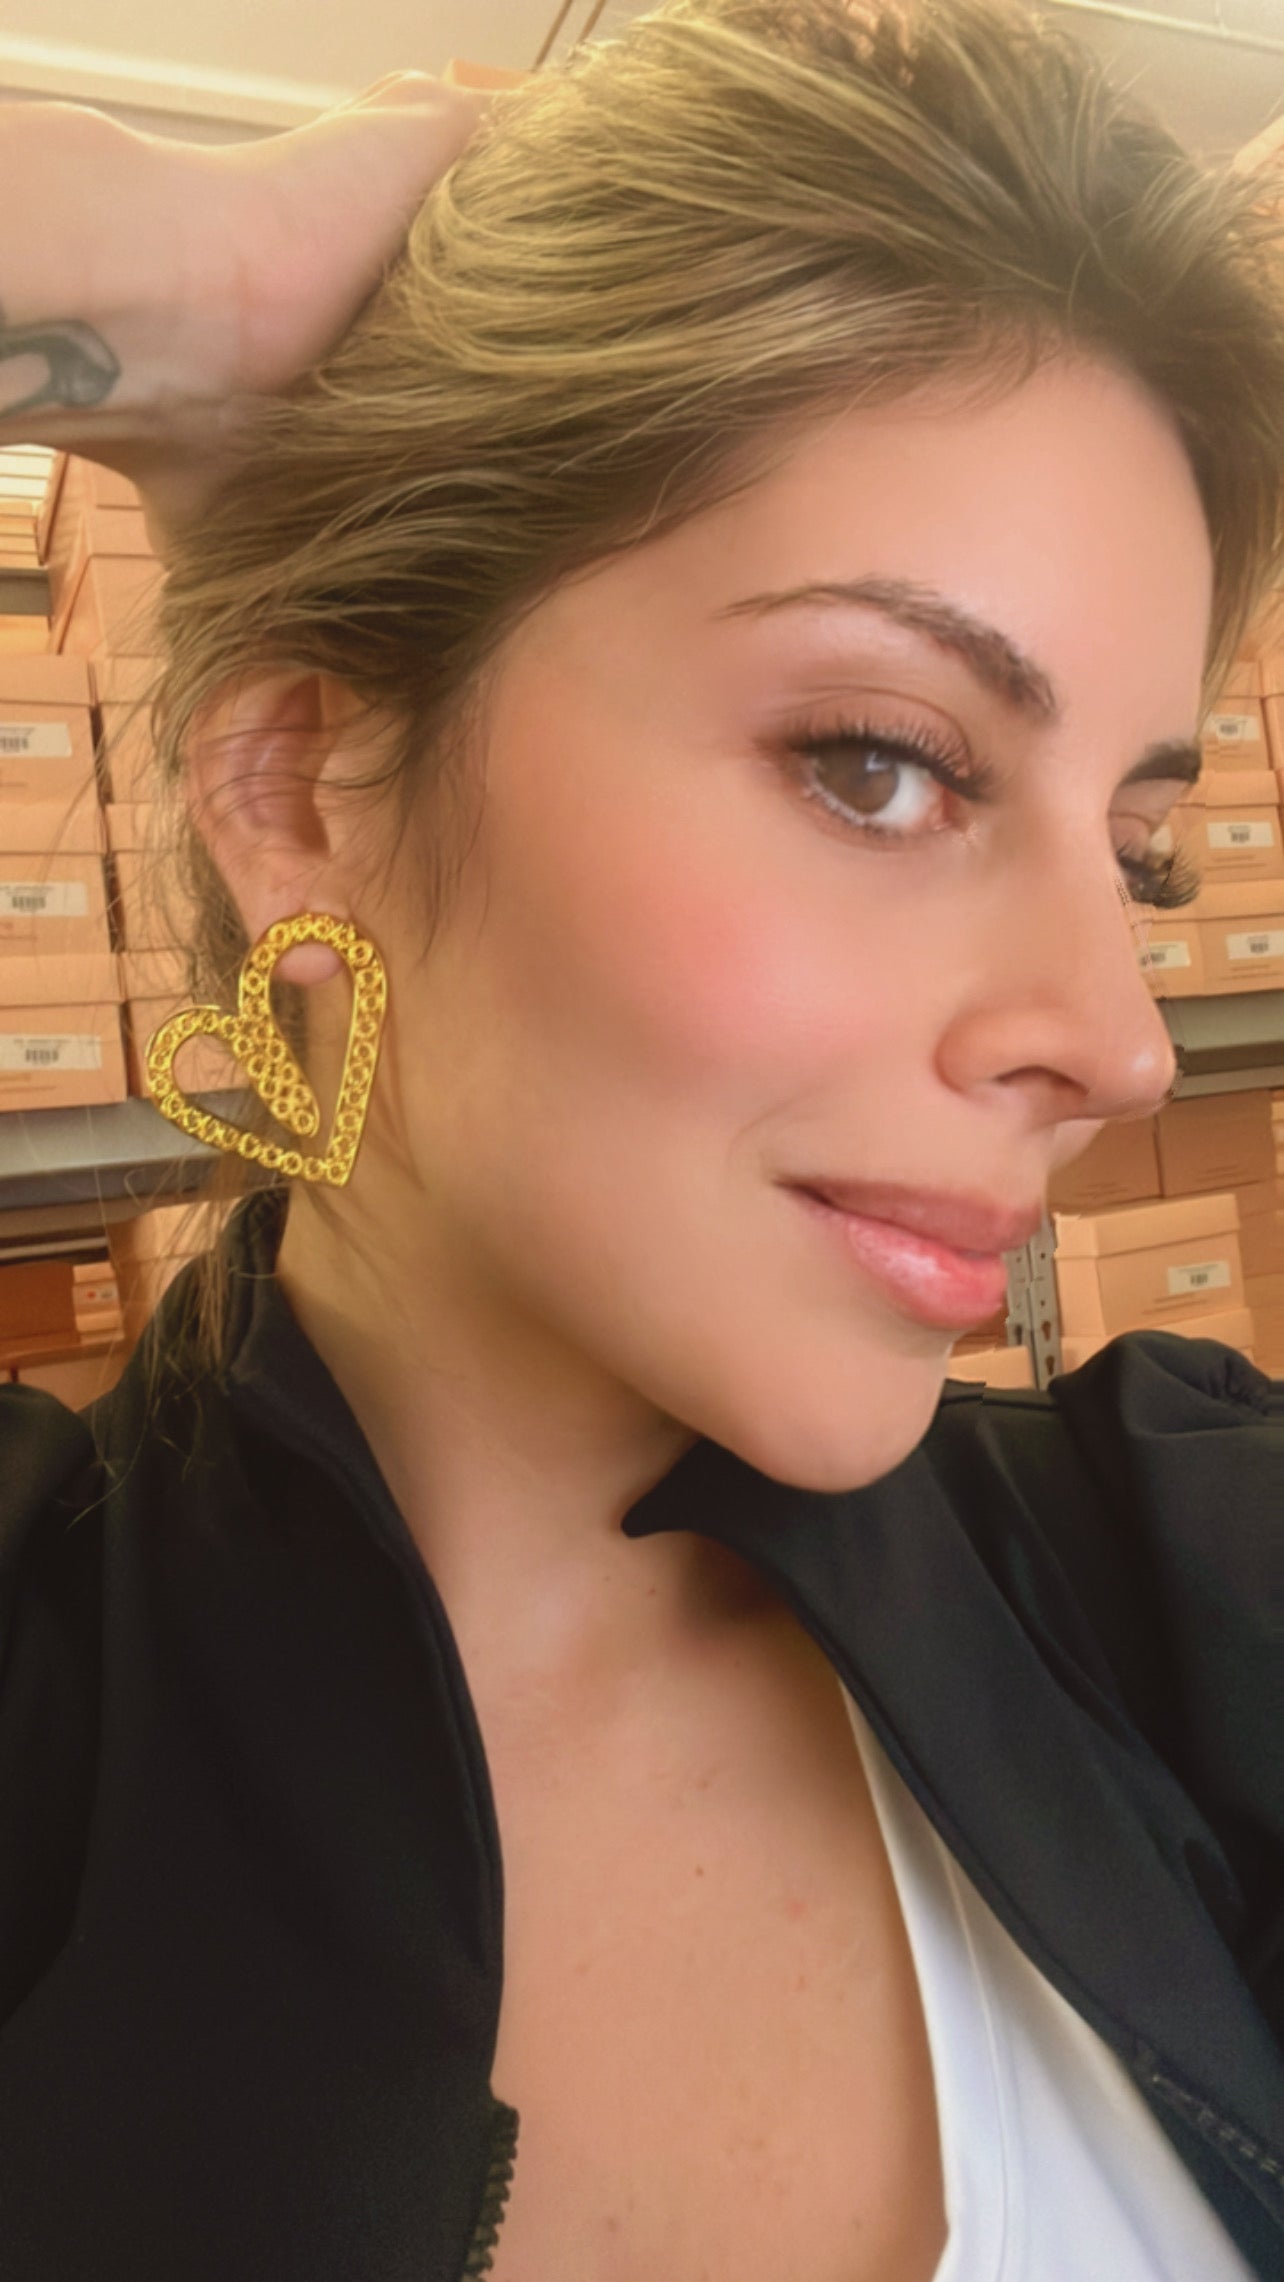 Filigrana Earrings by Nataly Mendez Gold plated Material: Bronce con baño de oro 24k